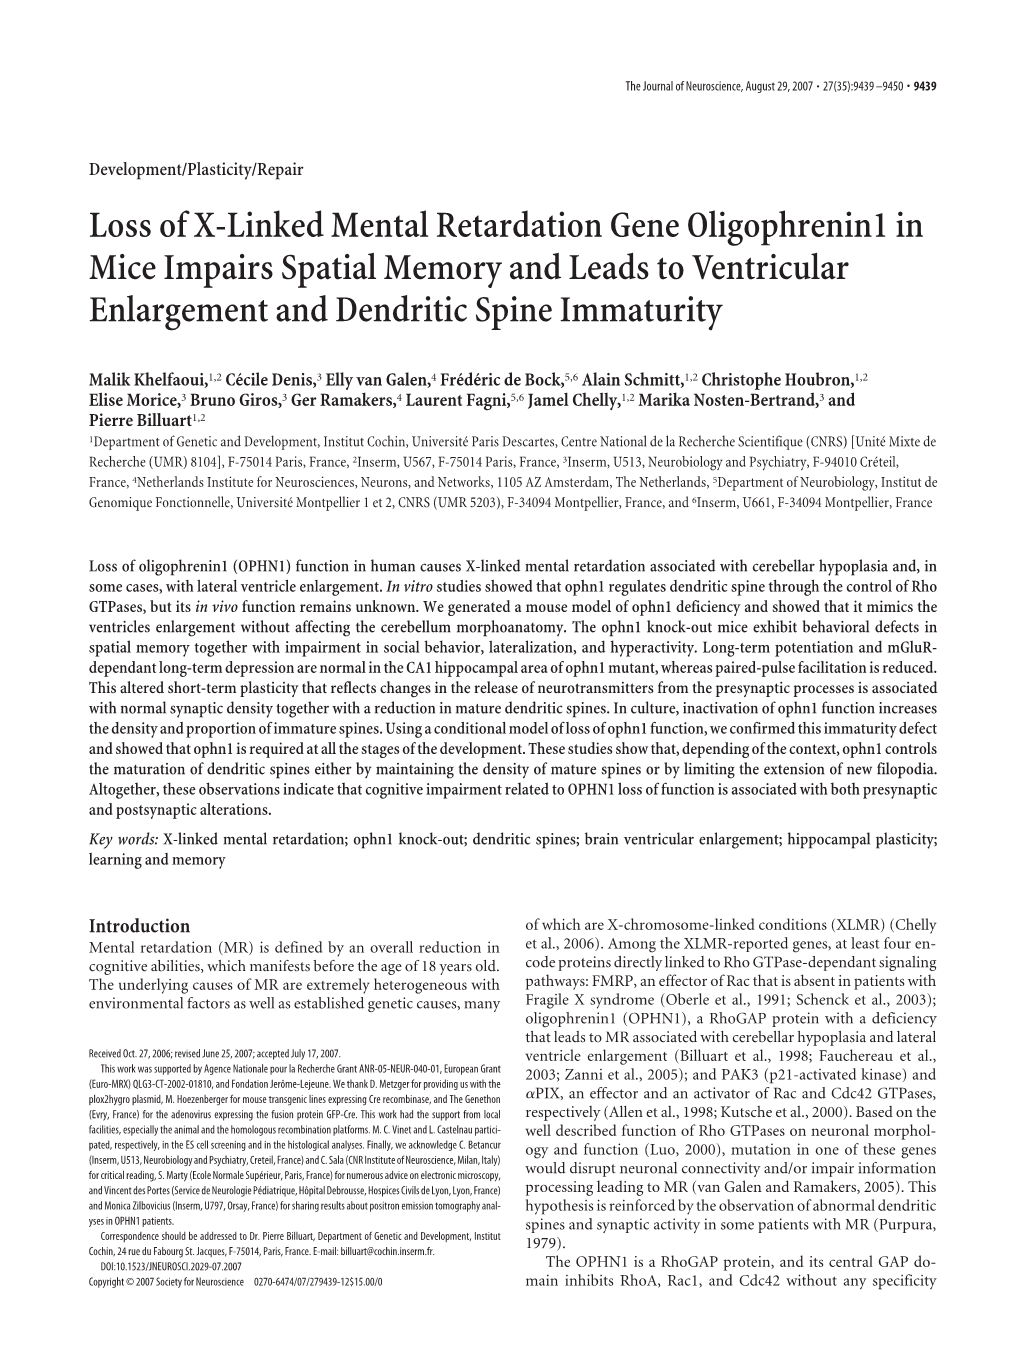 Loss of X-Linked Mental Retardation Gene Oligophrenin1 in Mice Impairs Spatial Memory and Leads to Ventricular Enlargement and Dendritic Spine Immaturity